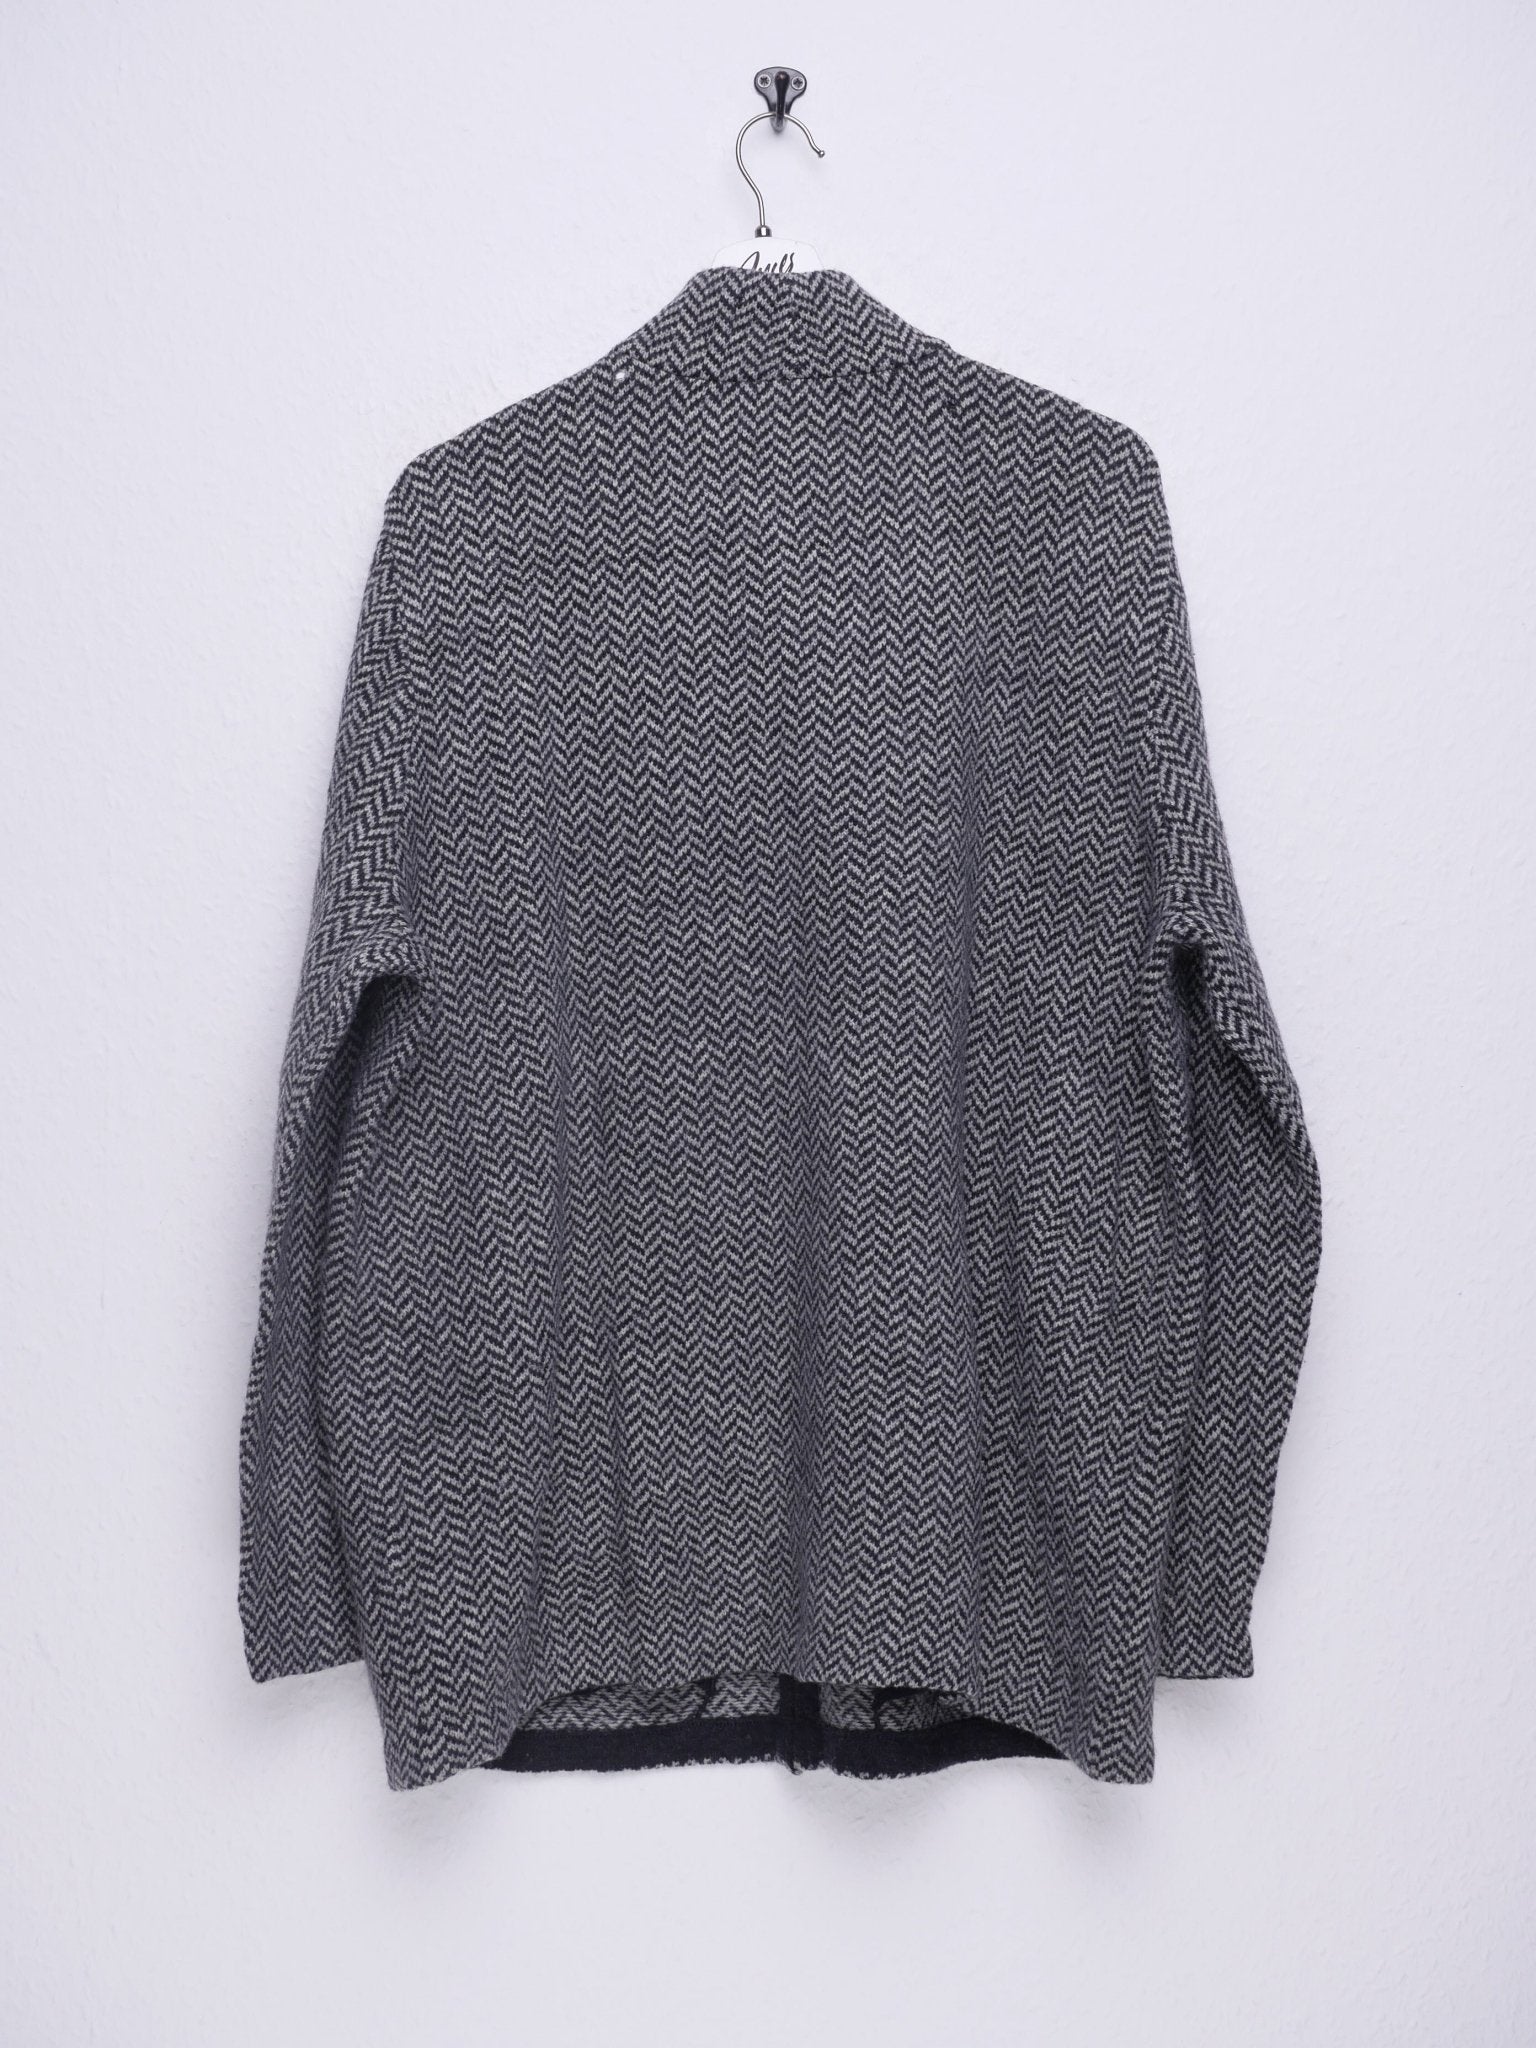 Polo Ralph Lauren knitted black and grey patterned Zip Sweater - Peeces